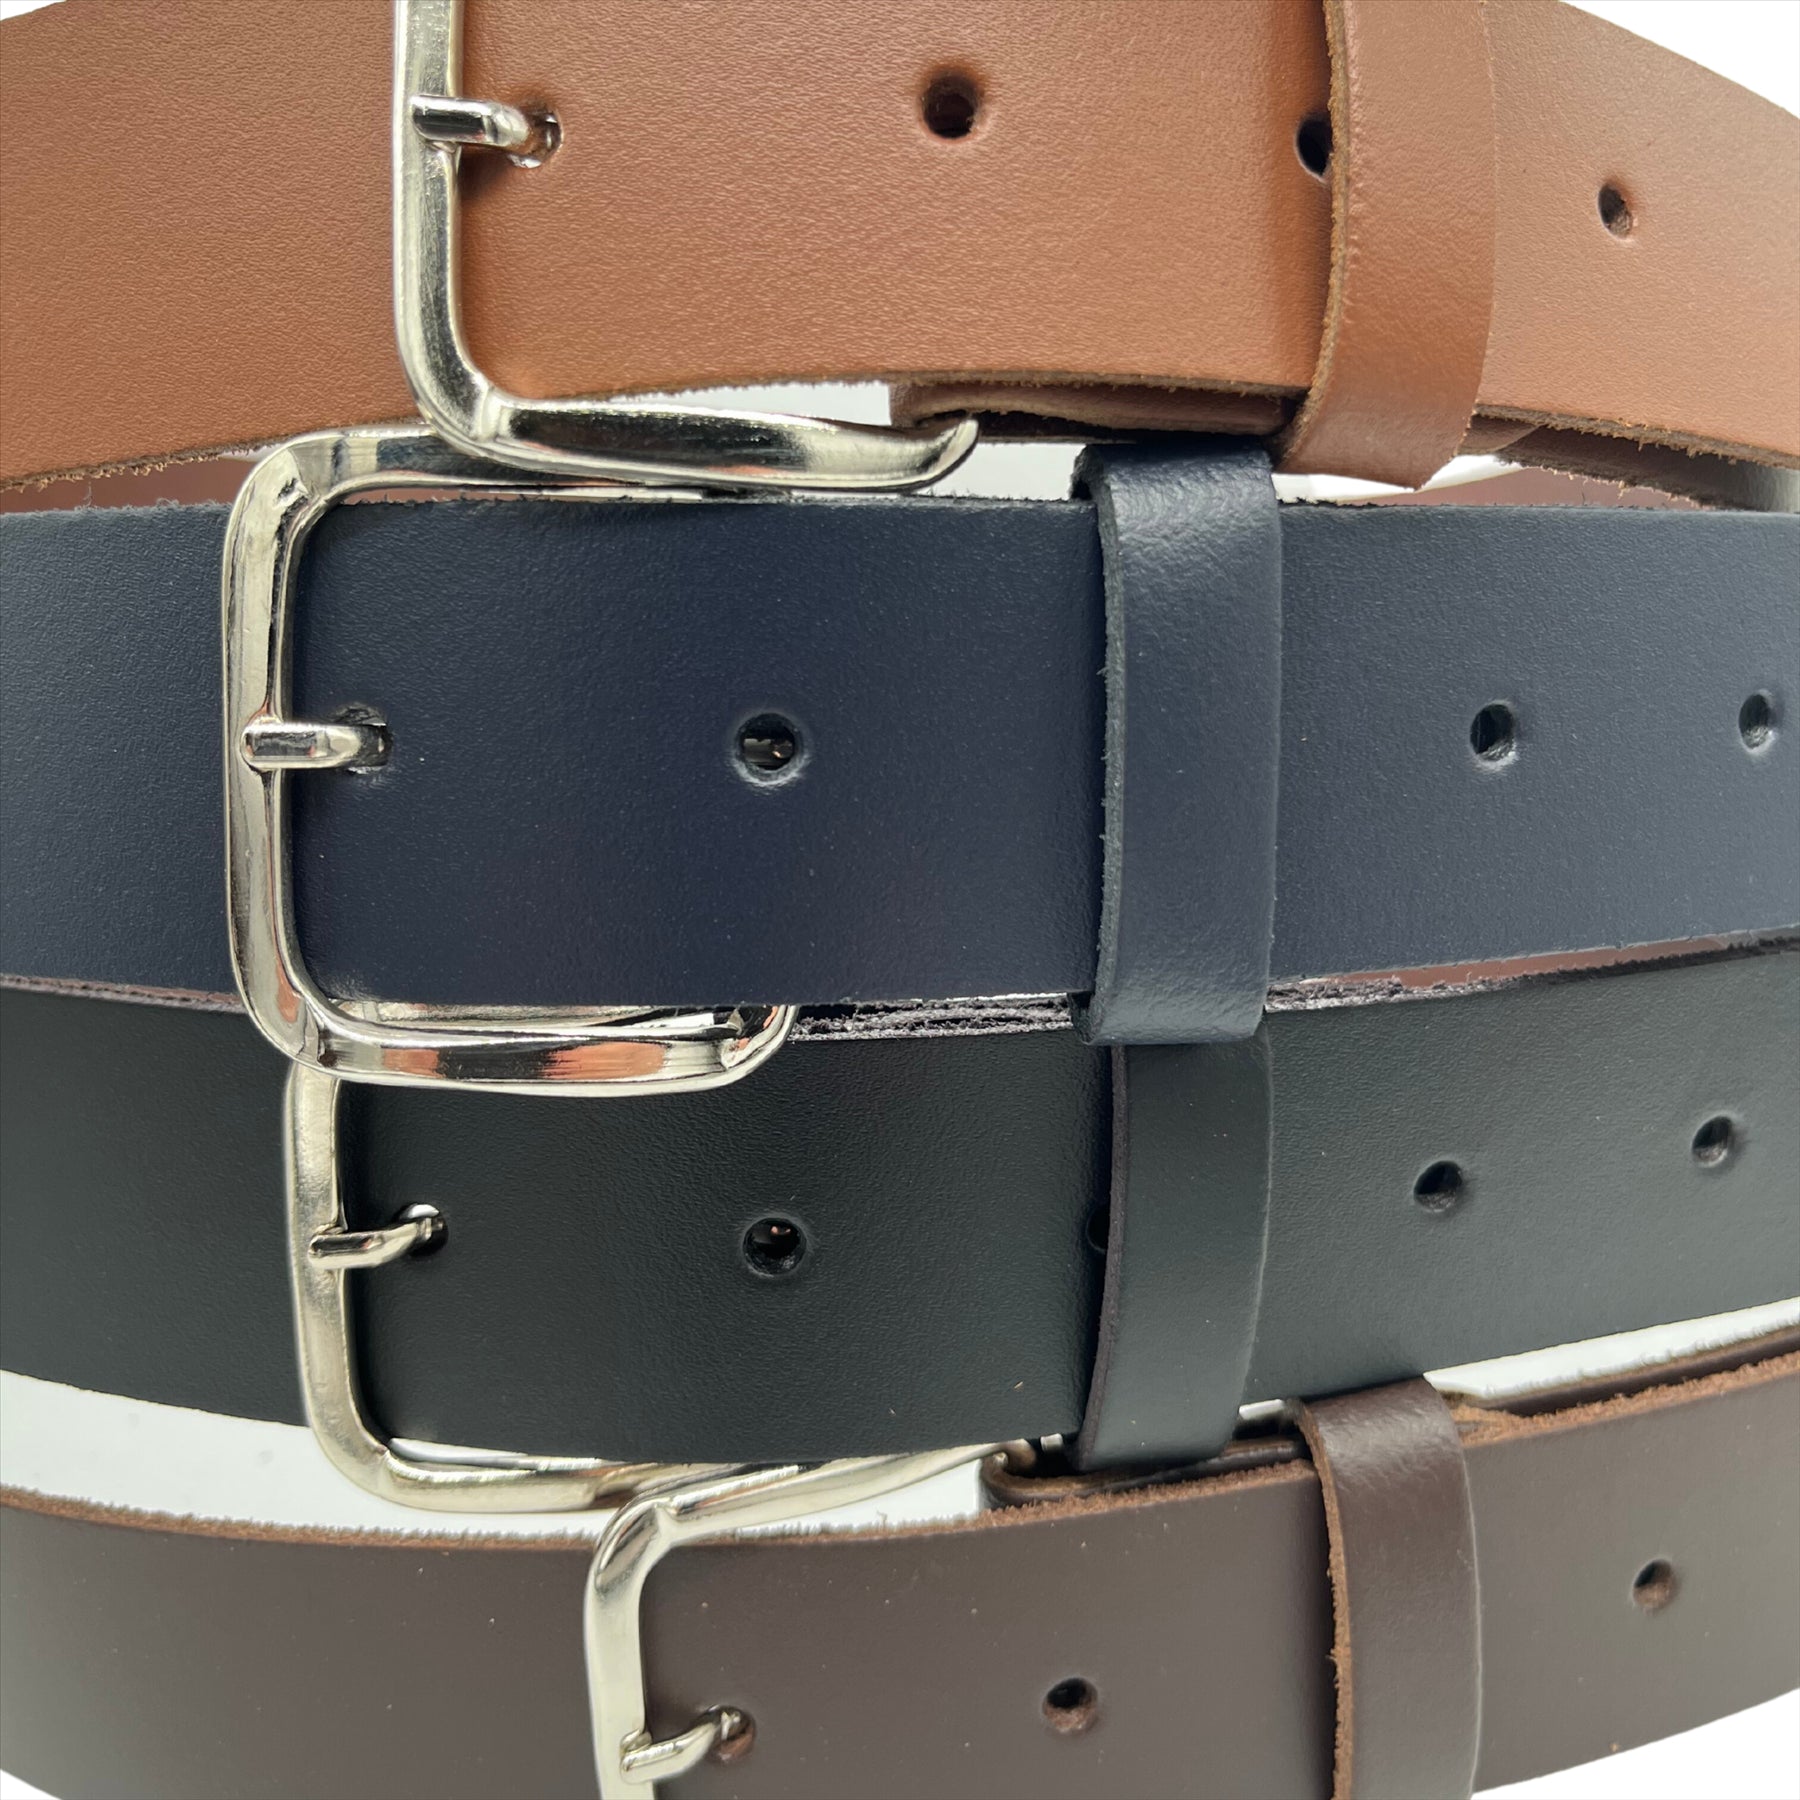 Handmade Mens Genuine Smooth Leather Belt Fathers Day Birthday Best Man Present - Just Horse Riders